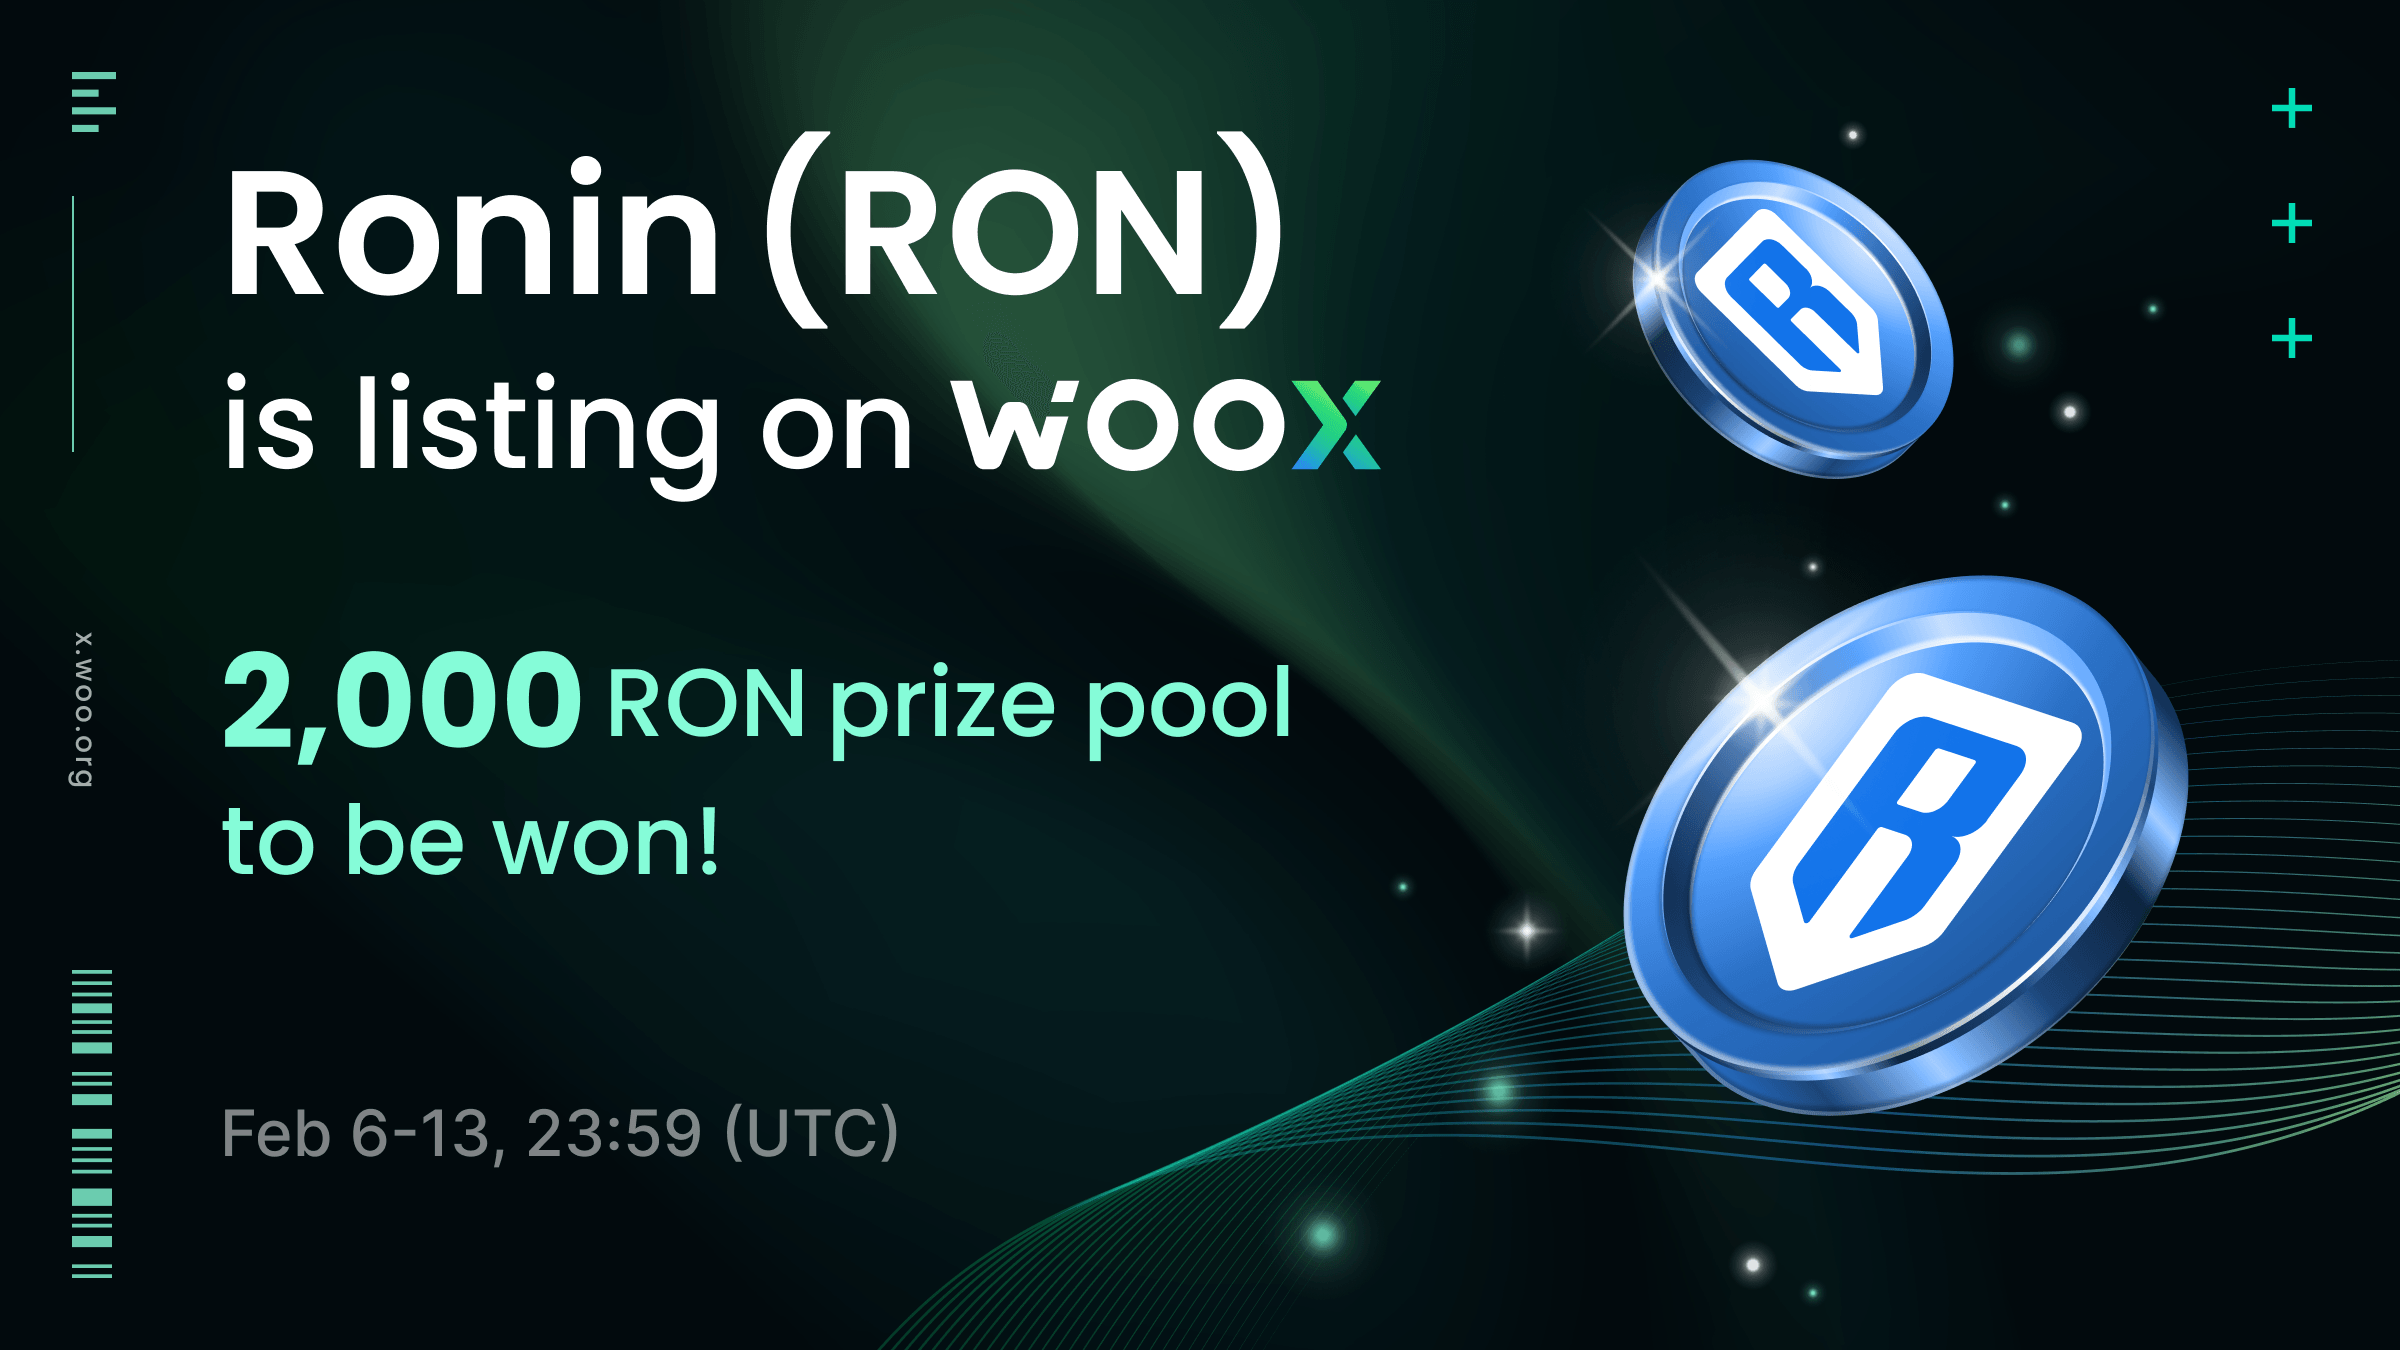 New Listing: RONIN (RON) on WOO X - Trade and share a 2,000 RON prize pool!